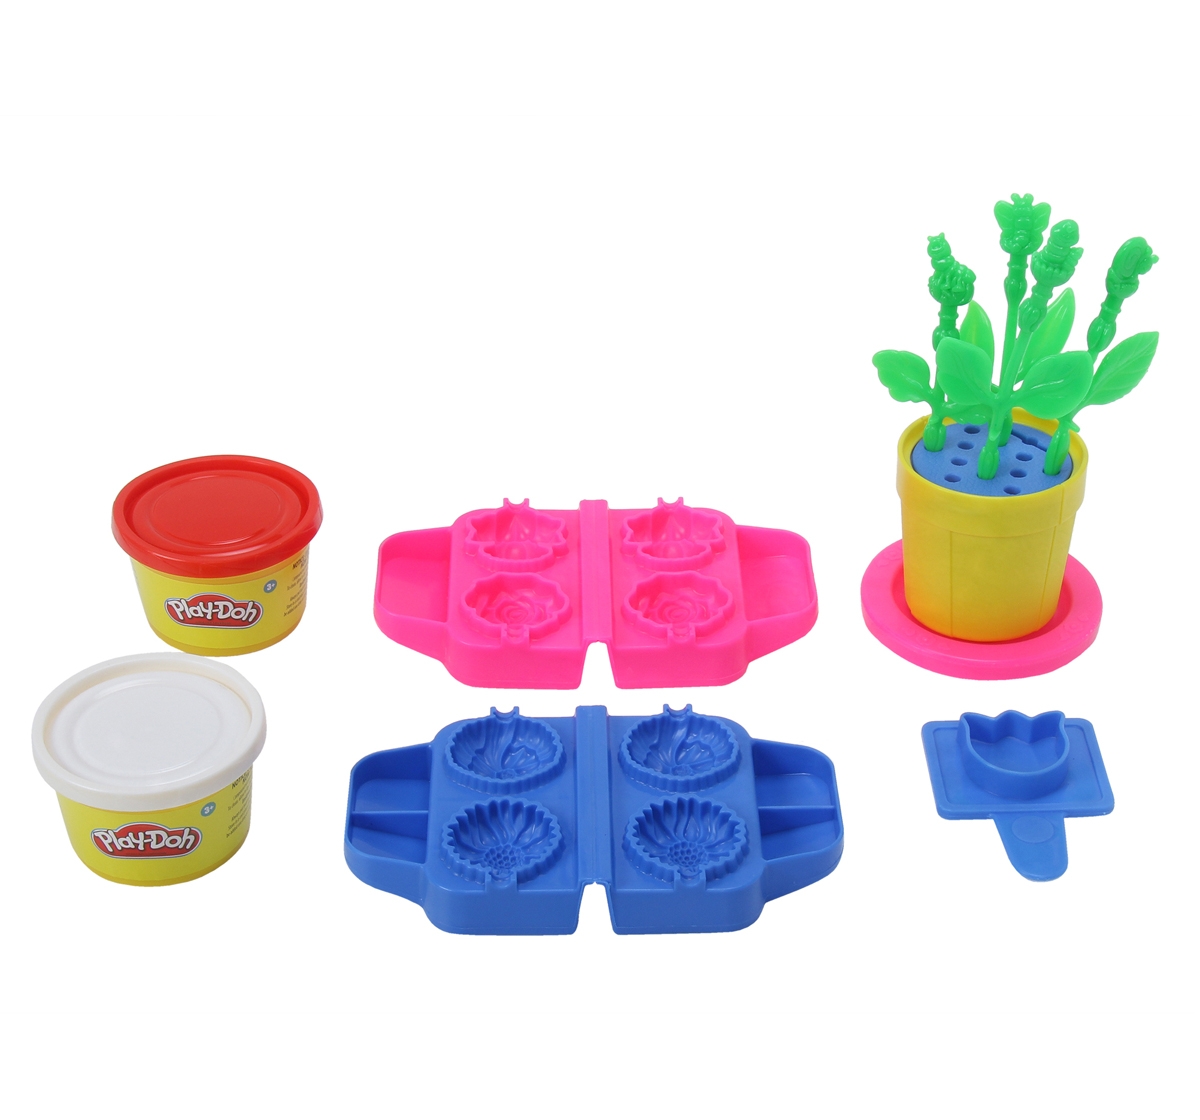 Play Doh Rose Garden Playset for Kids 3Y+, Multicolour